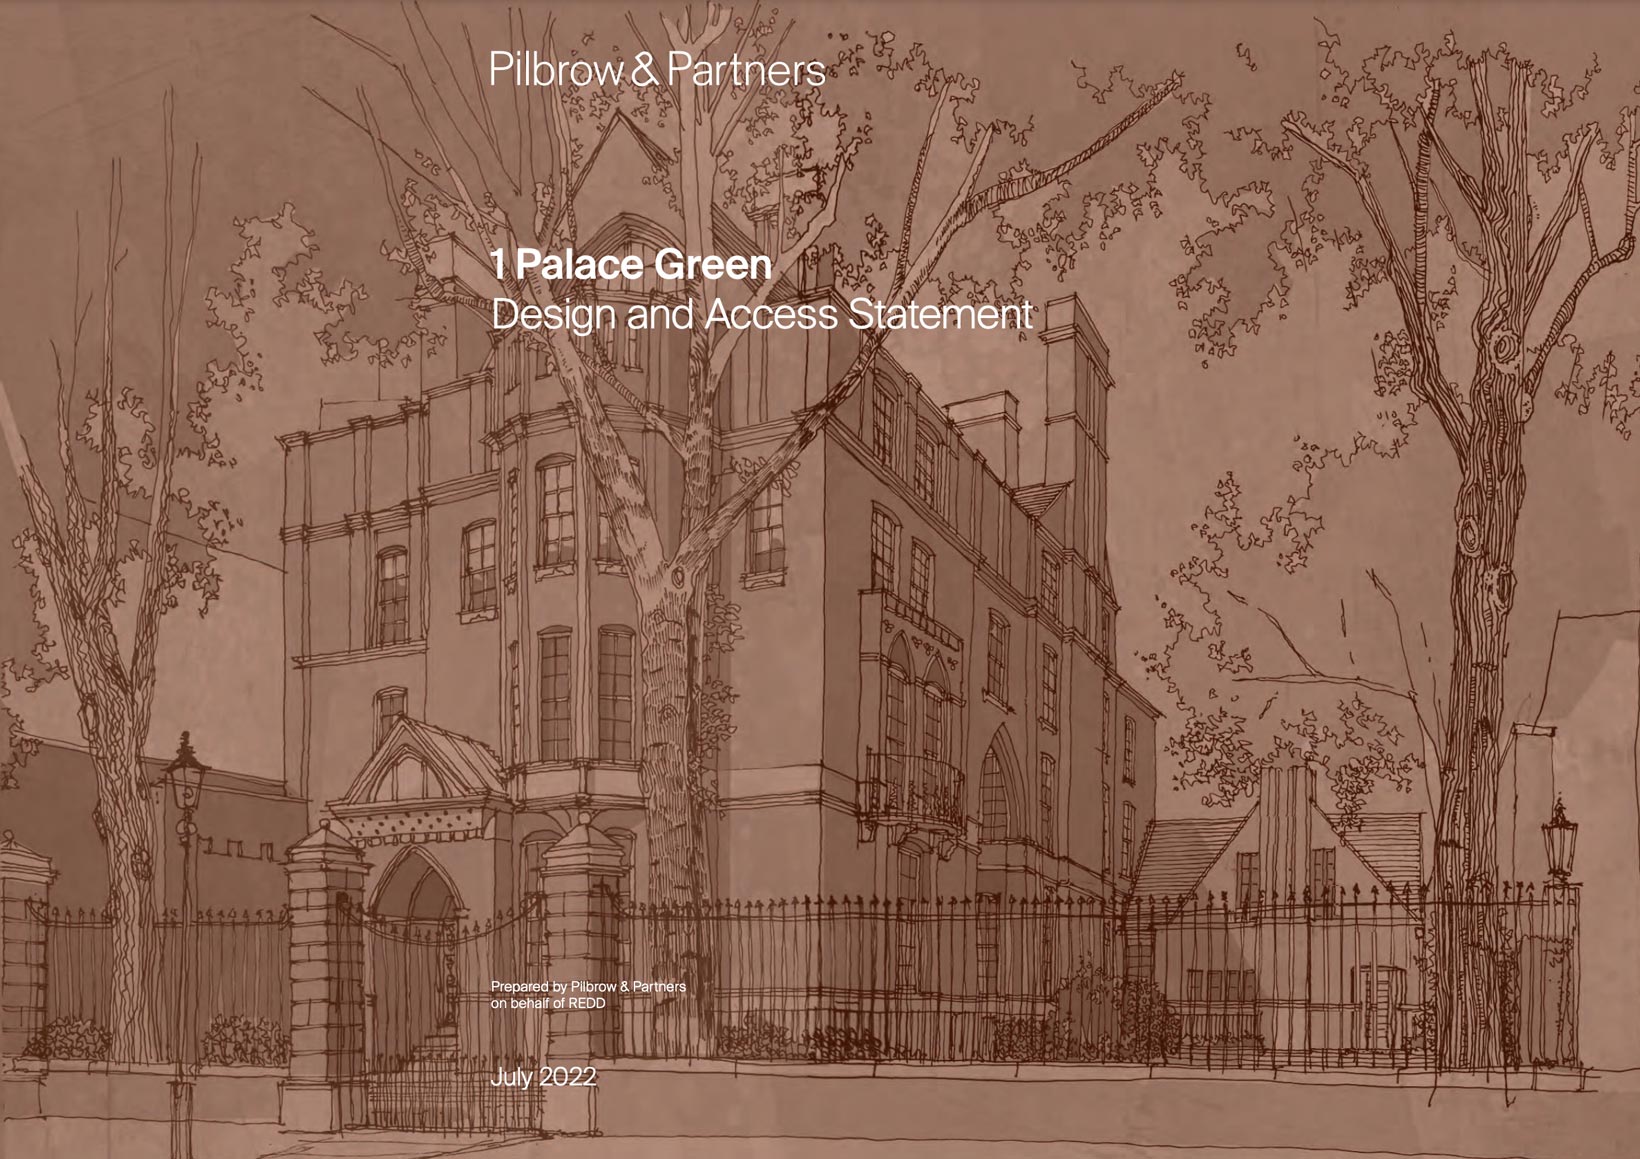 Planning application submitted for the redevelopment of Grade II* listed One Palace Green